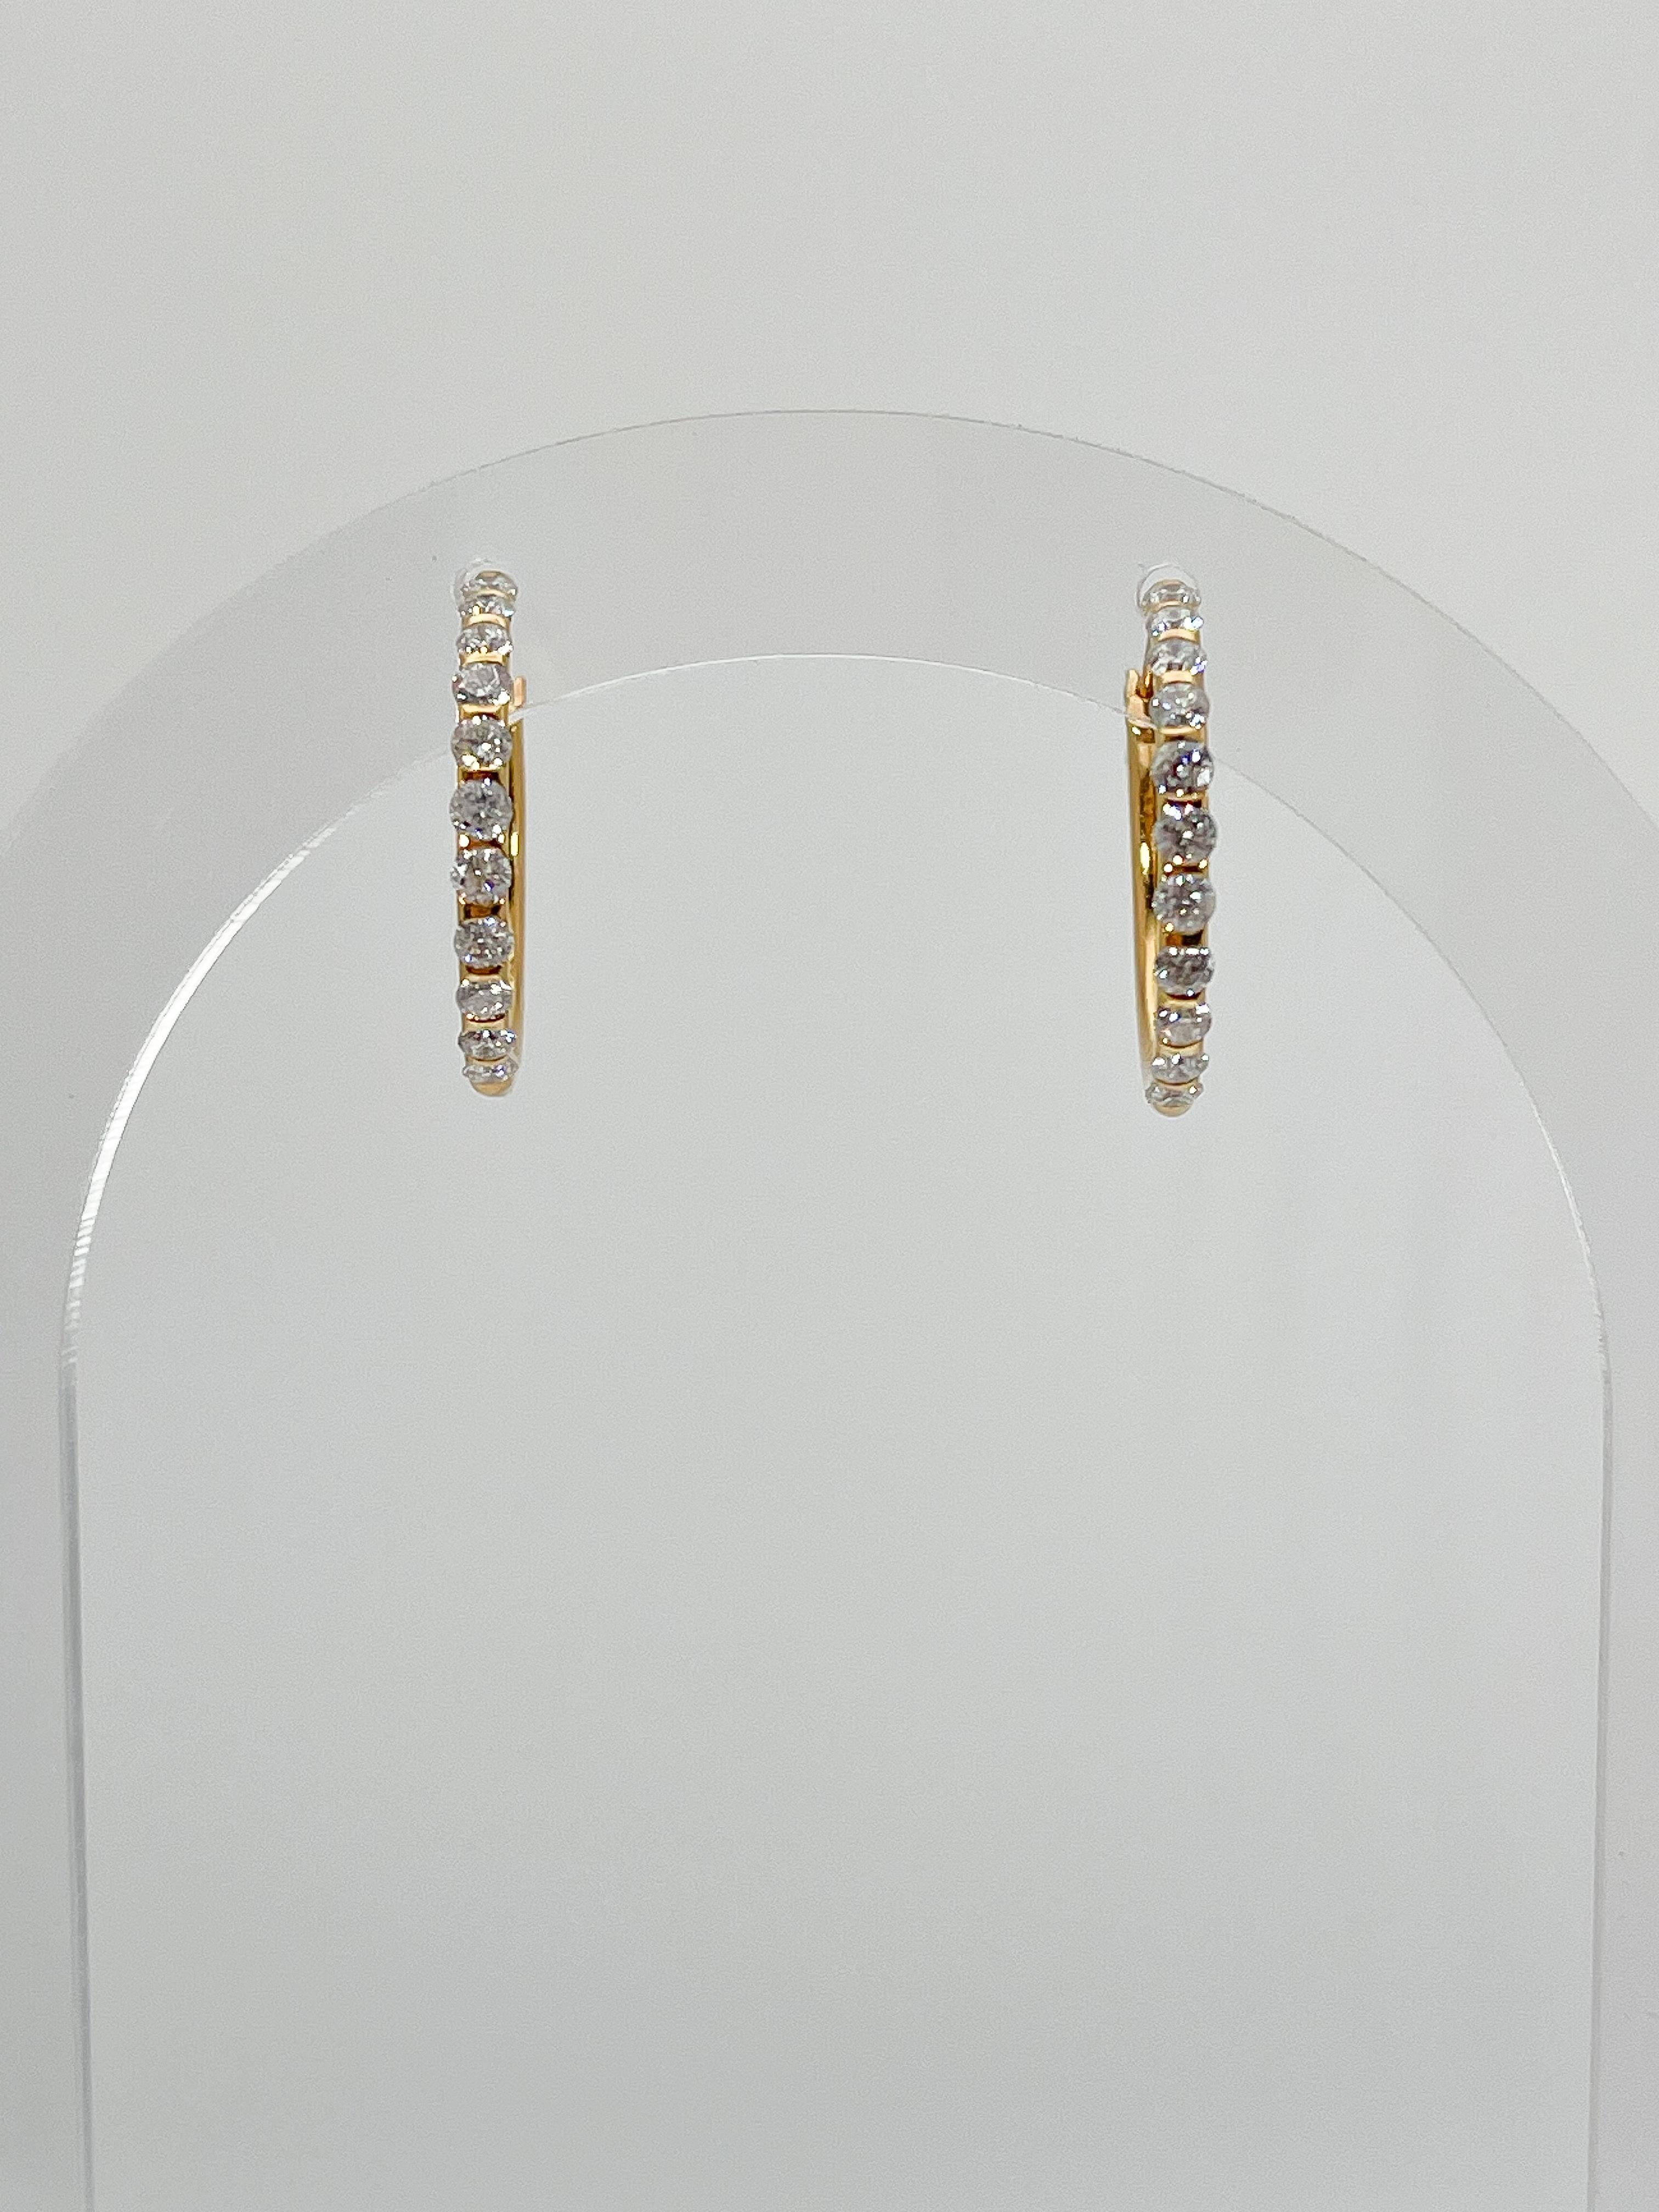 14k yellow gold .75 CTW Diamond Hoop Earrings. These earrings have 11 round diamonds on each hoop, they have a diameter of 20.5 mm, and weigh a total of 3.2 grams. 